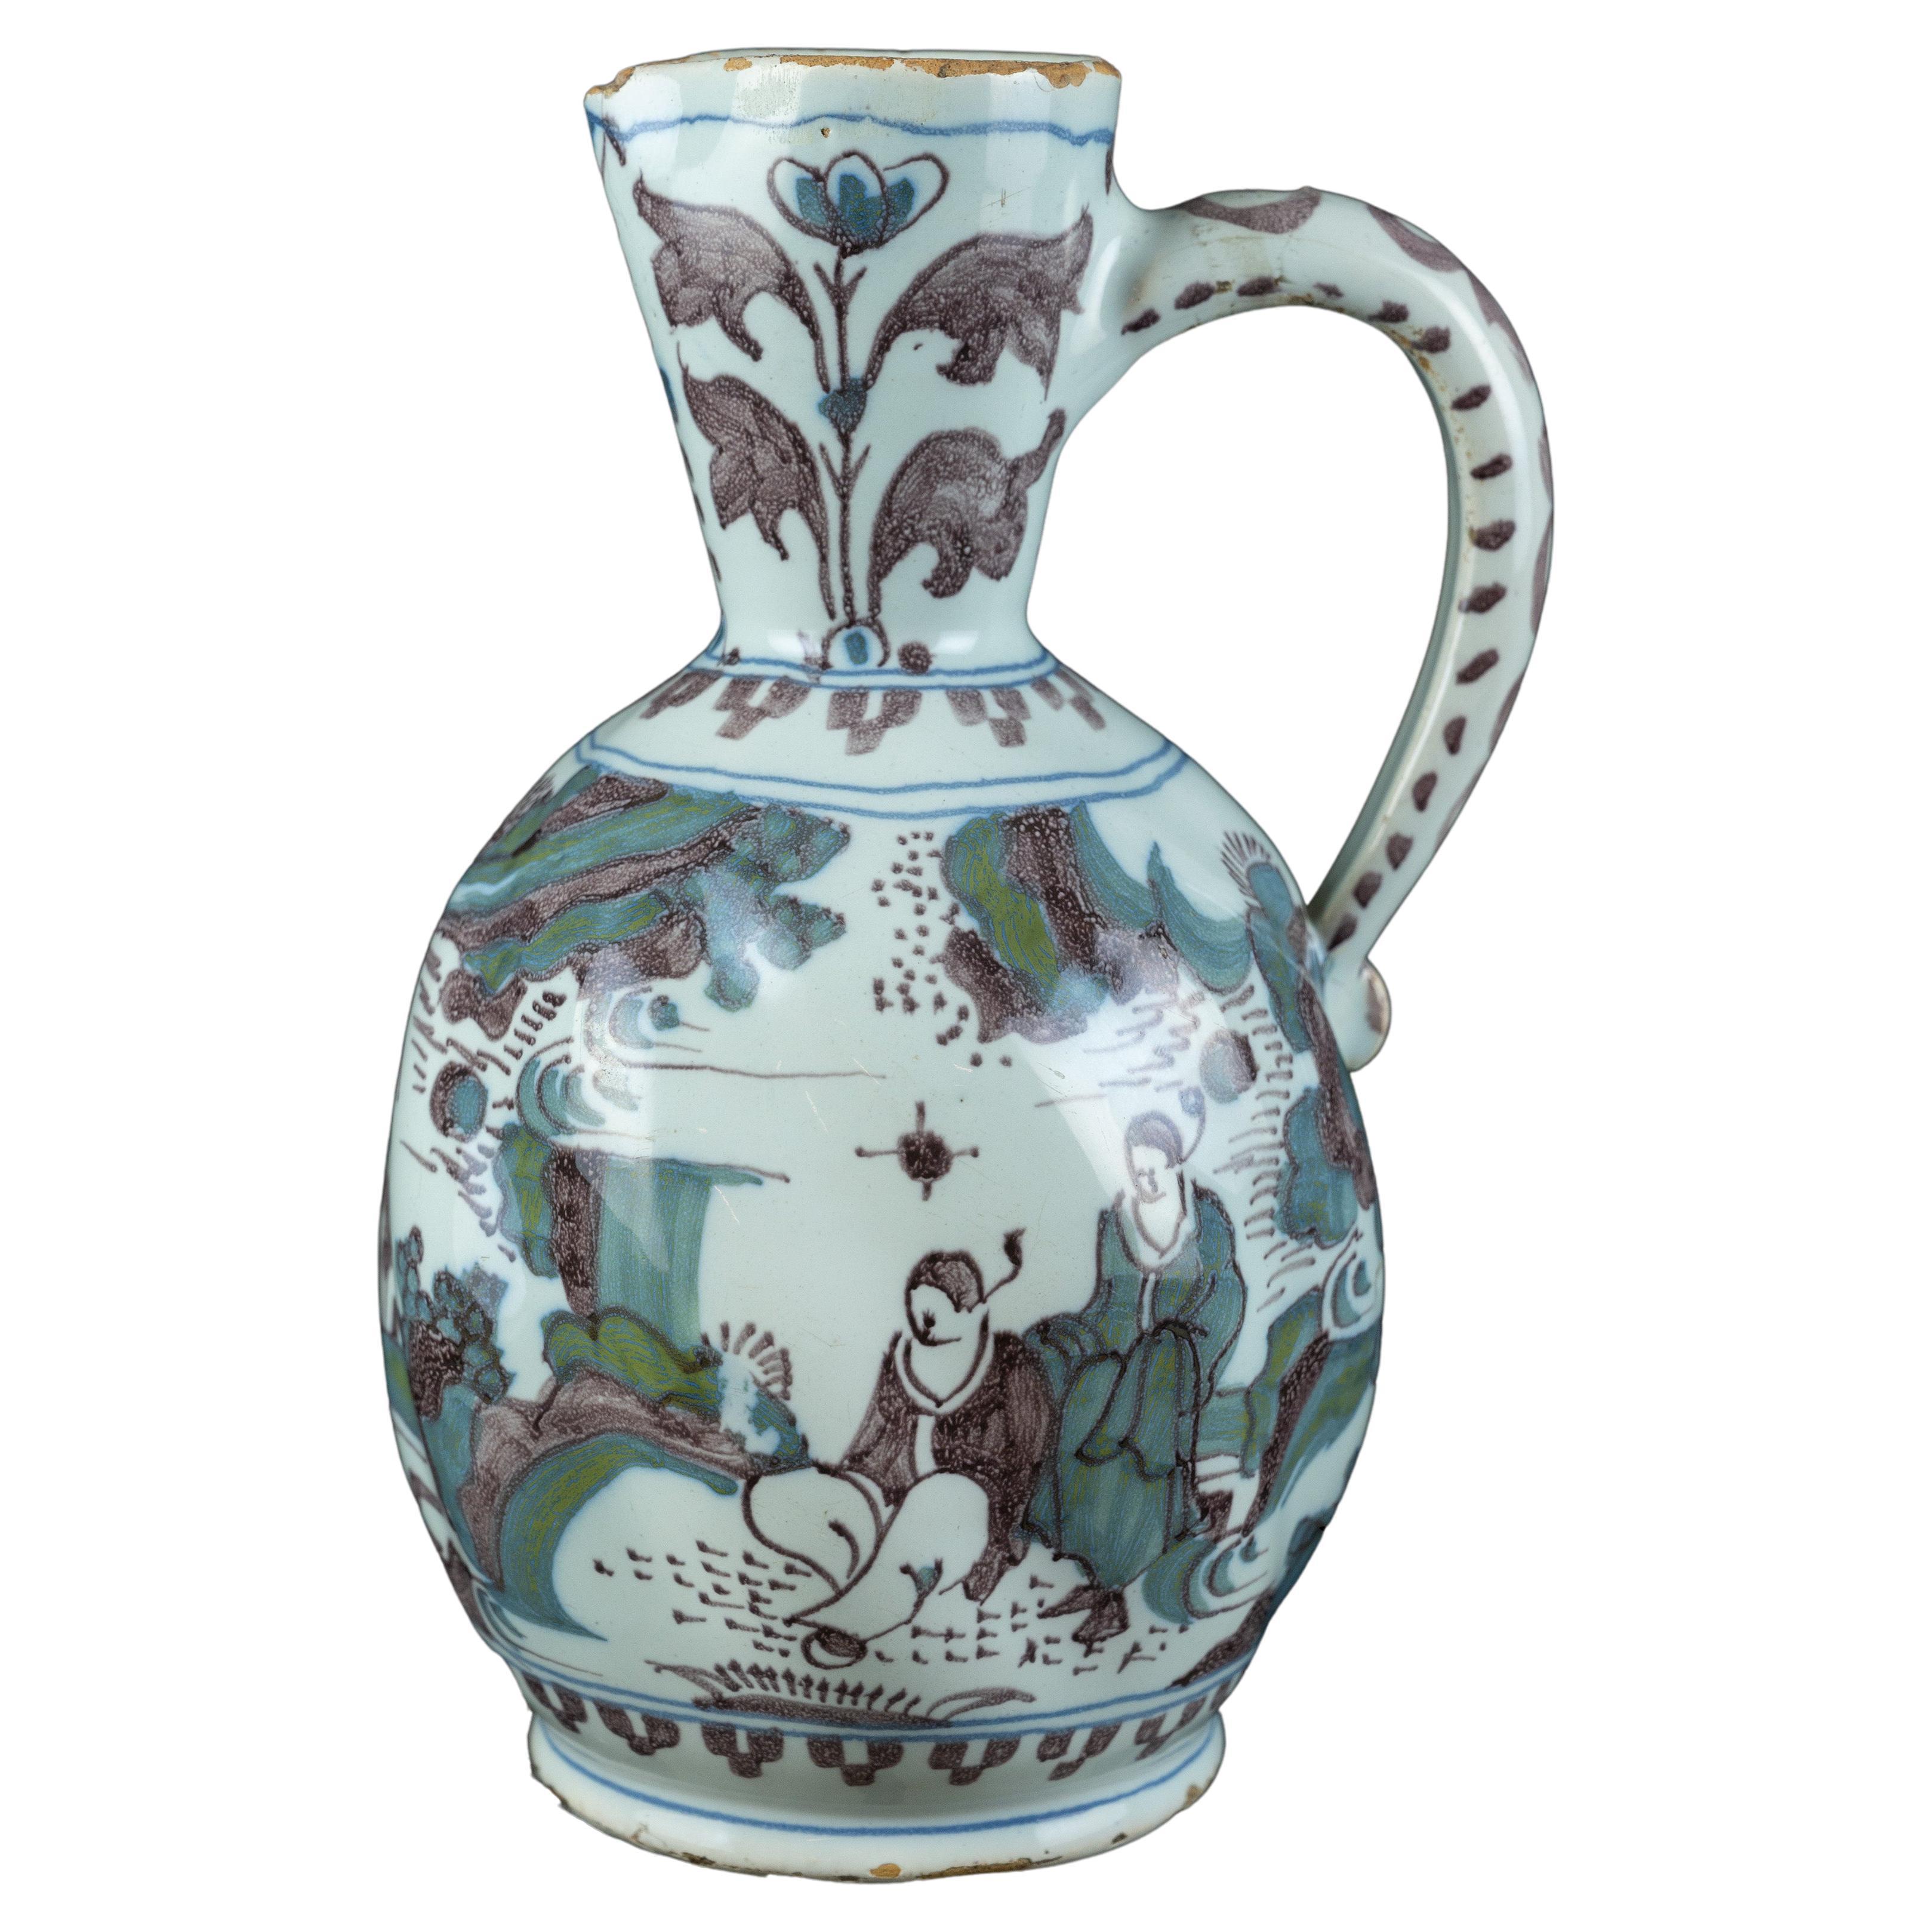 Polychrome Chinoiserie Wine Jug with Turned Body, Delft, circa 1680